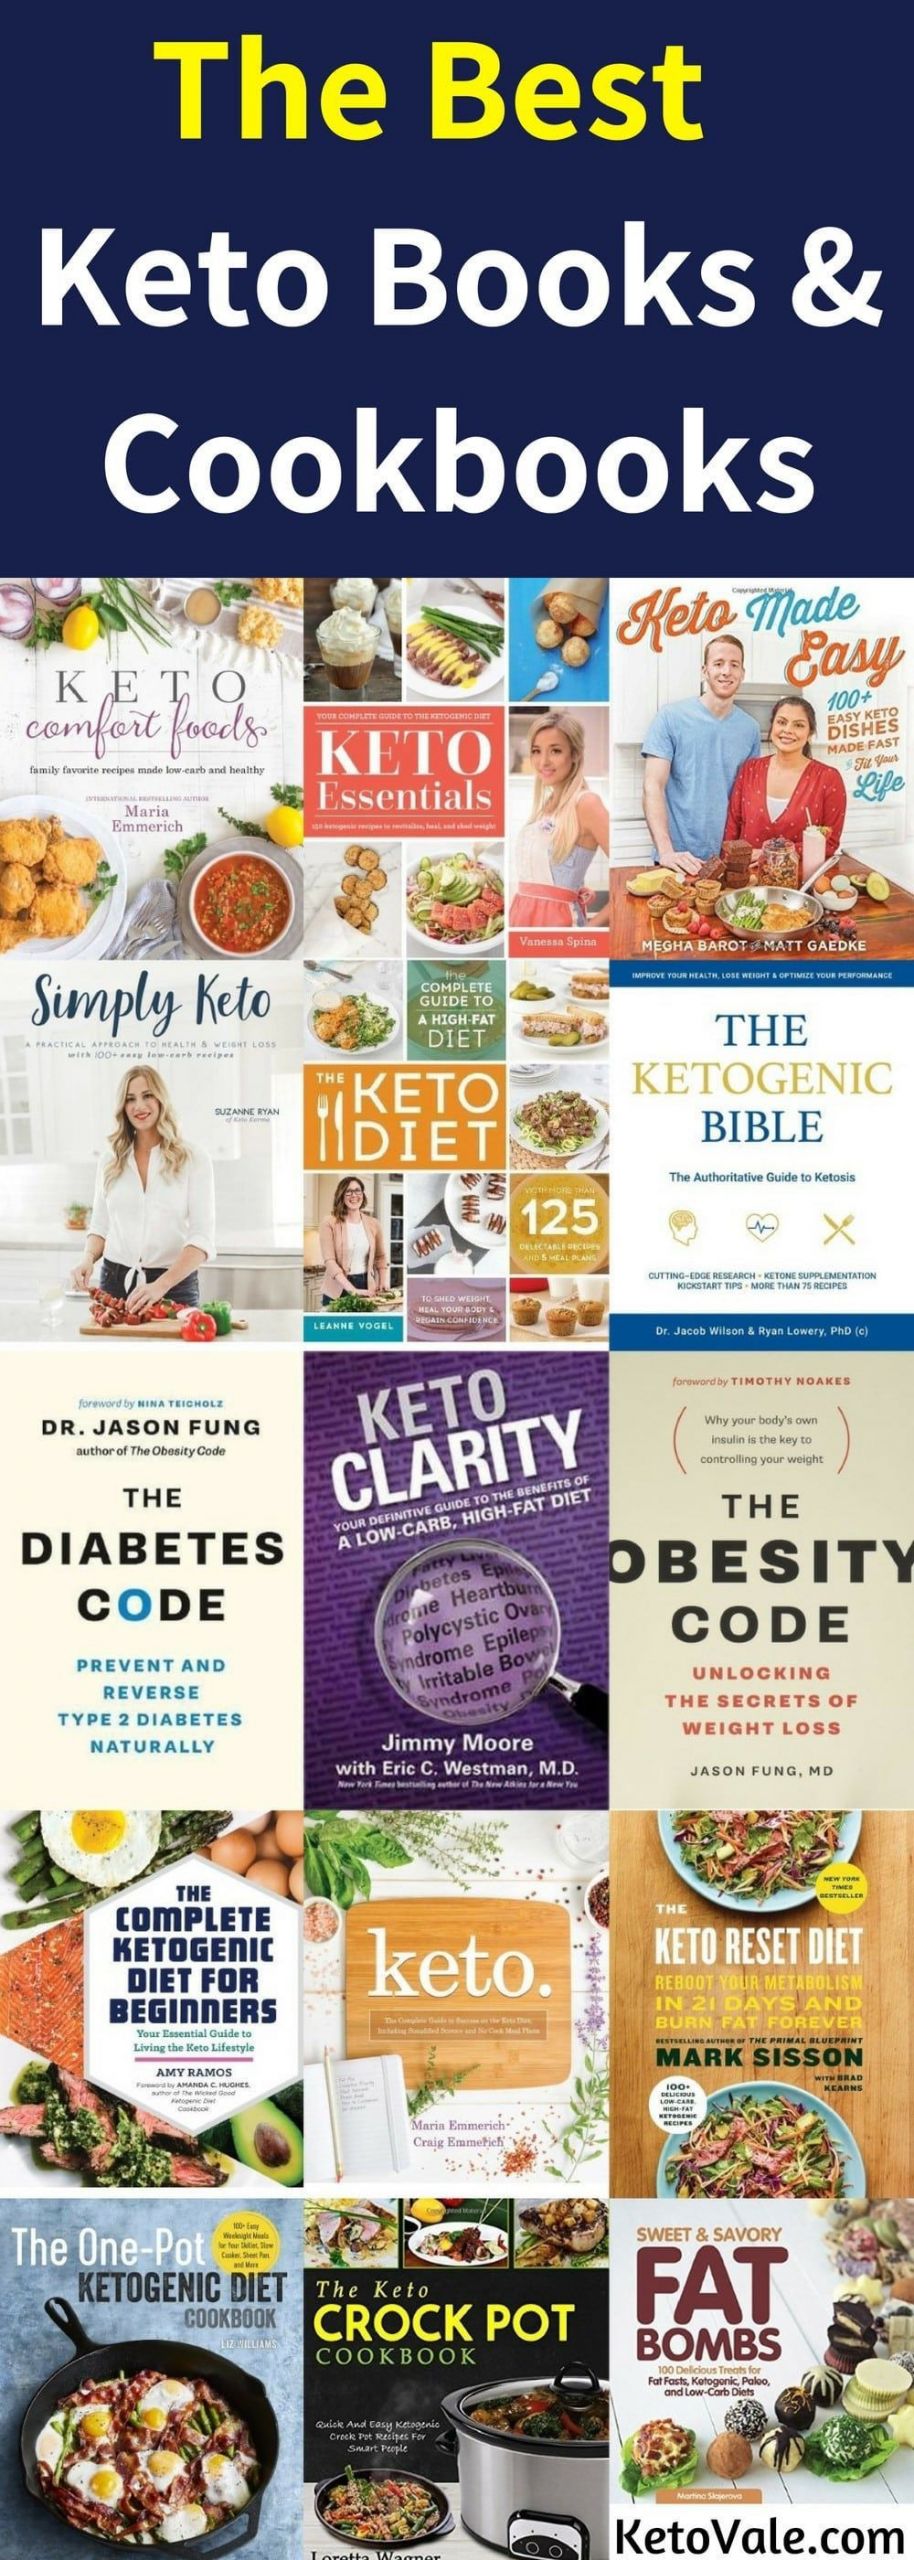 Best Keto Diet Books
 Best Keto Books and Cookbooks Free & Paid for 2018